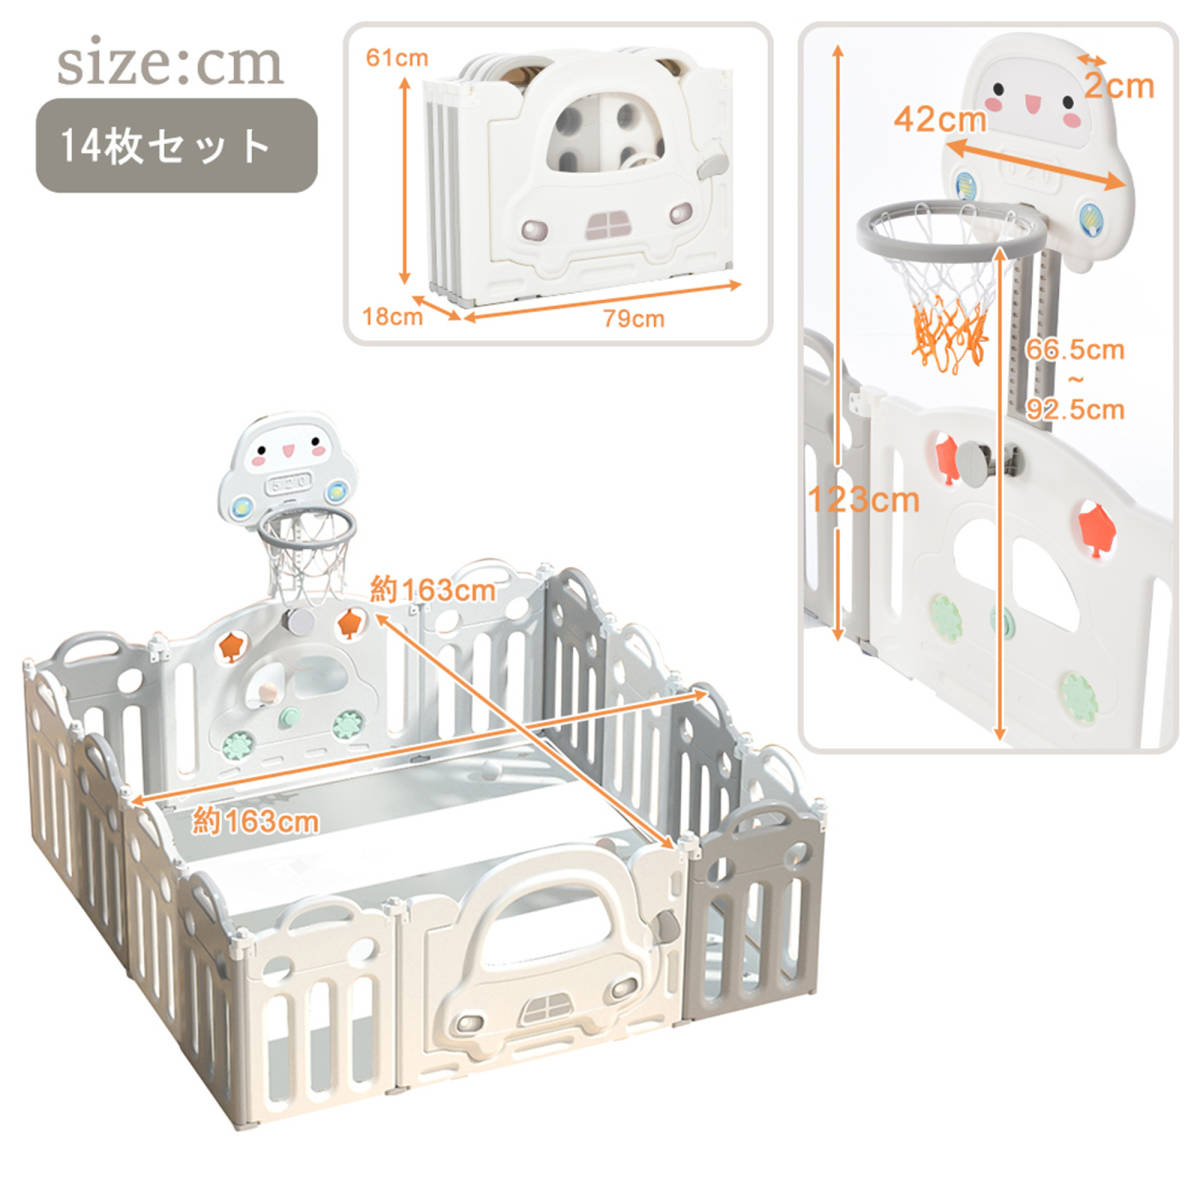  playpen slipping pcs swing folding 14 pieces set 163*206cm deformation possibility door attaching basket goal attaching toy panel baby gate 